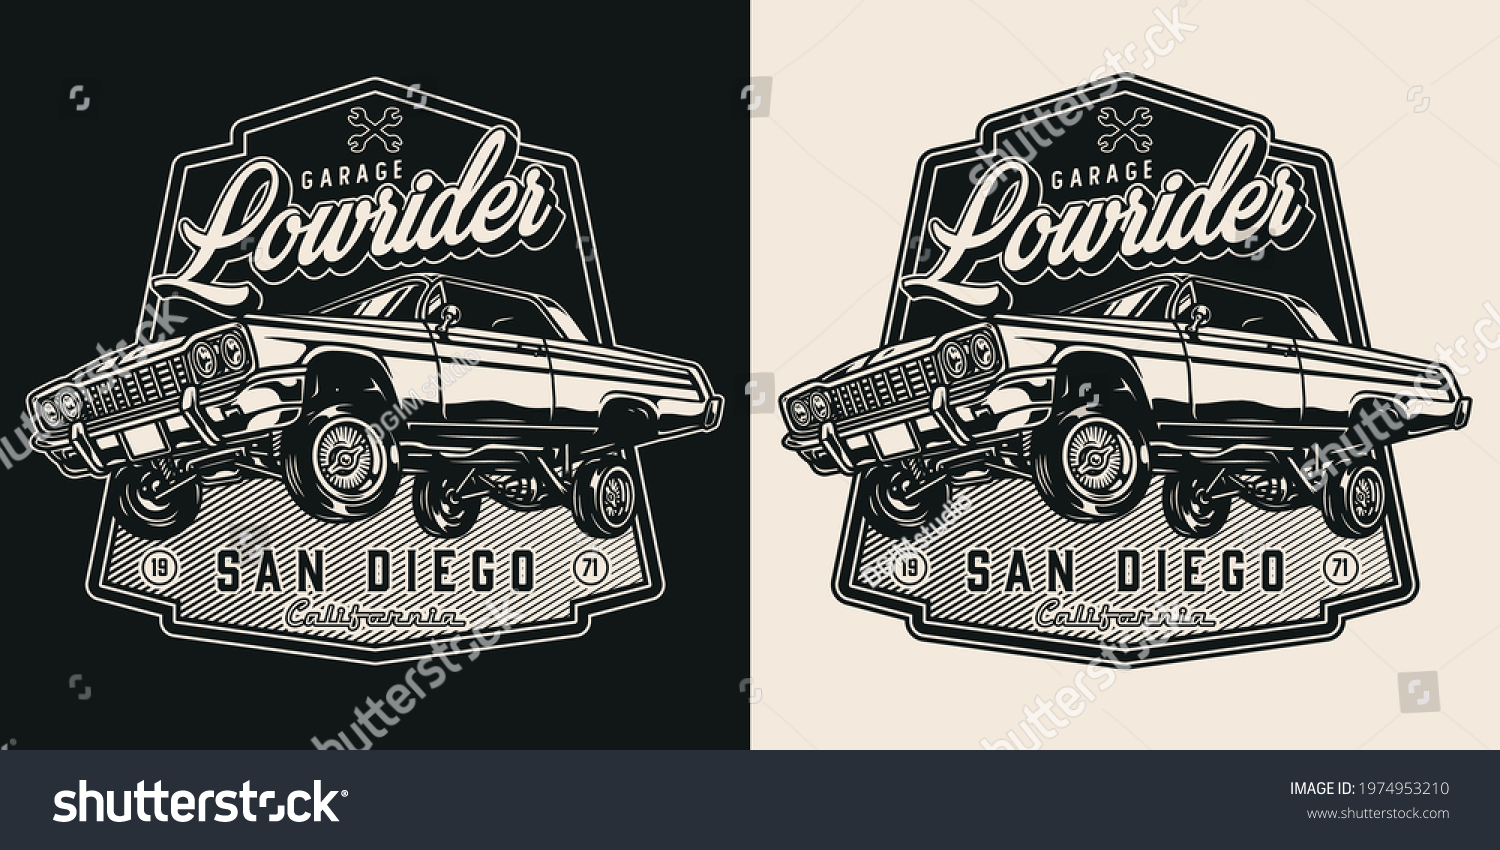 SVG of Lowrider custom garage vintage print with inscriptions and american retro car in monochrome style isolated vector illustration svg